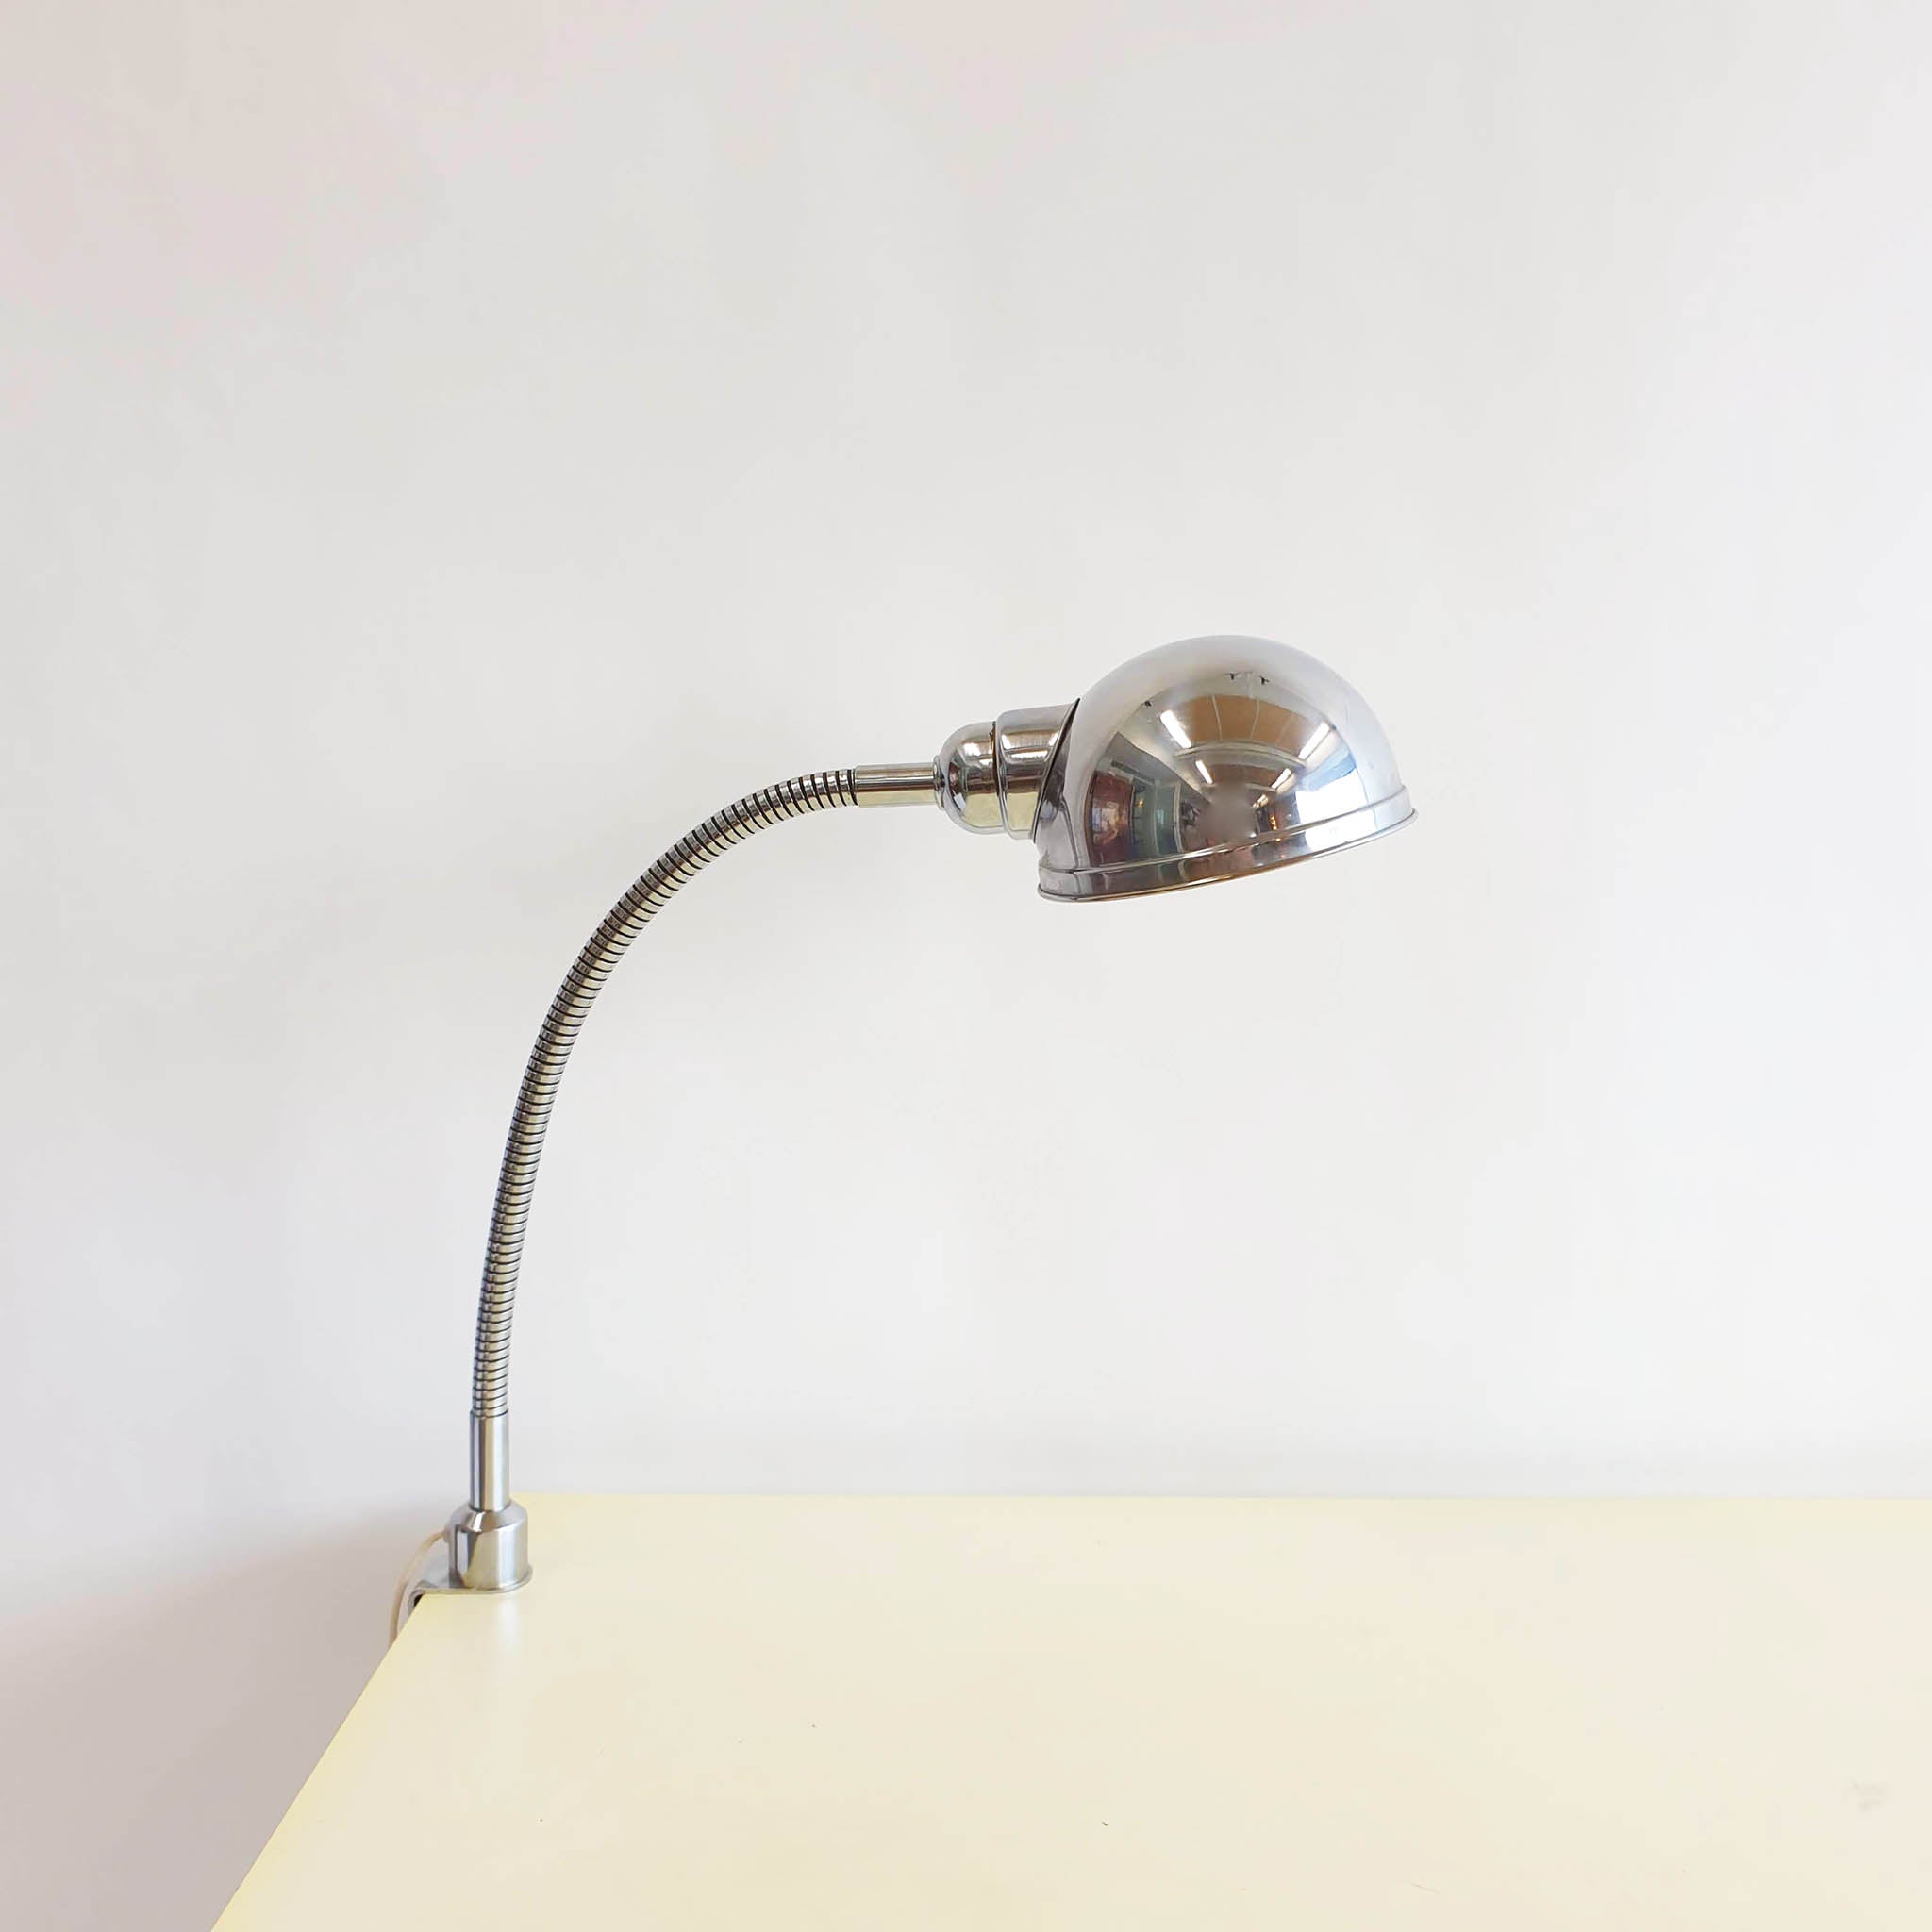 1980s desk lamp with clamp foot